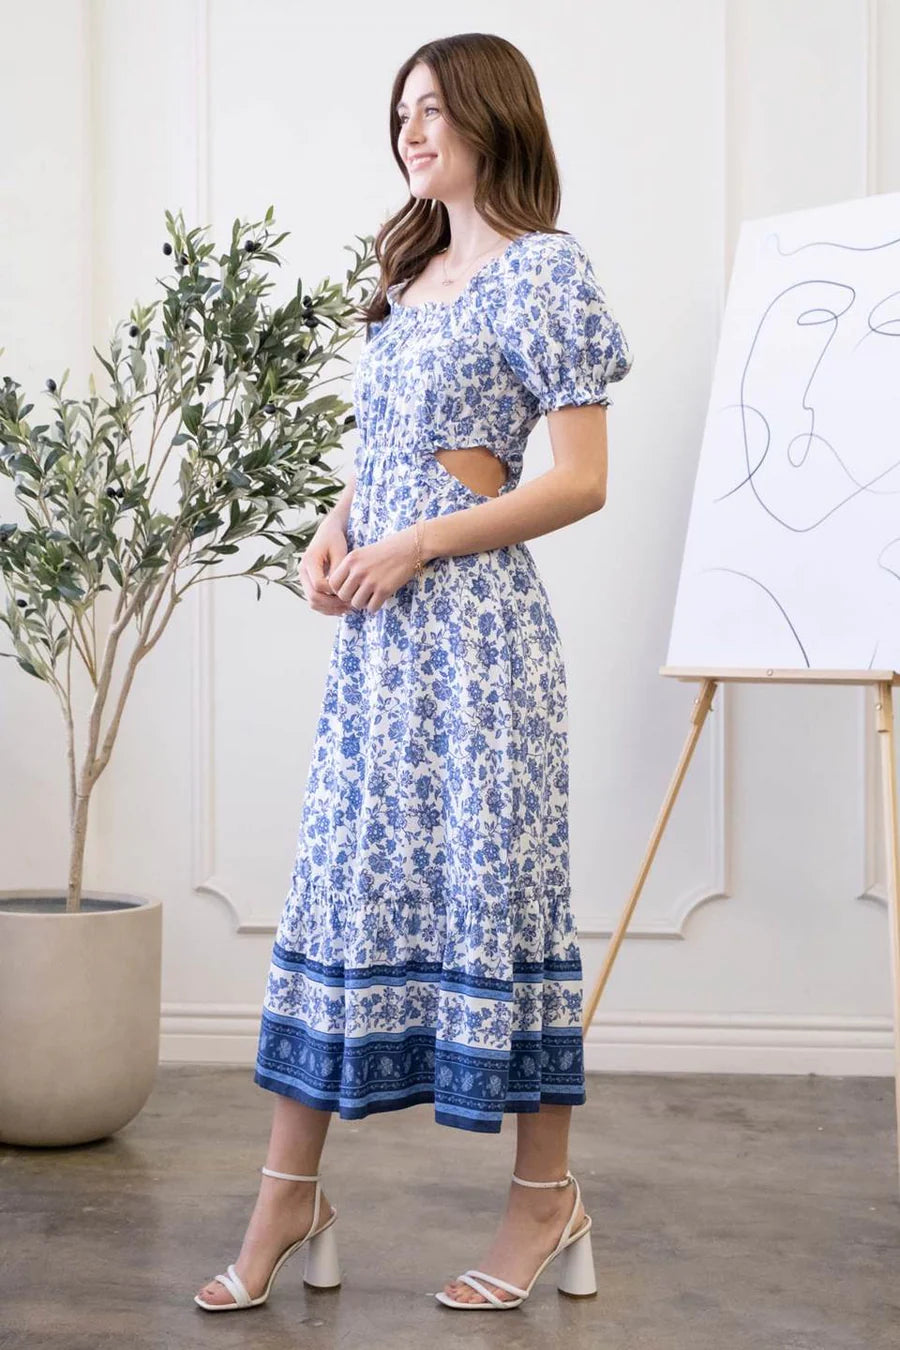 Blue and White Floral Short Sleeve Maxi Dress with Side Waist Cutout Detail